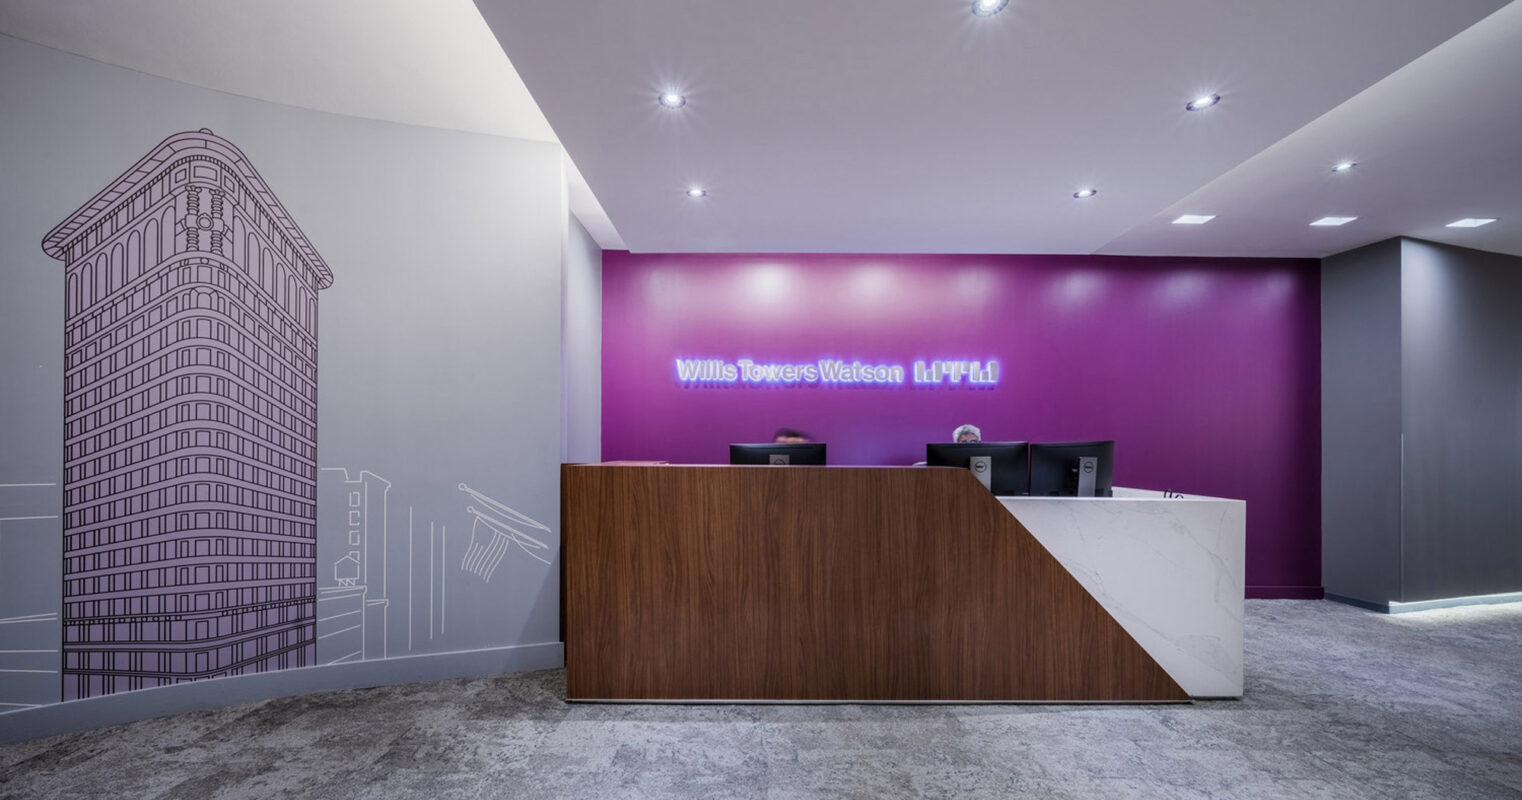 Elegant office lobby featuring a vibrant fuchsia accent wall with Willis Towers Watson branding and a line drawing of a skyscraper, complemented by a sleek, wooden reception desk and modern, recessed ceiling lighting.